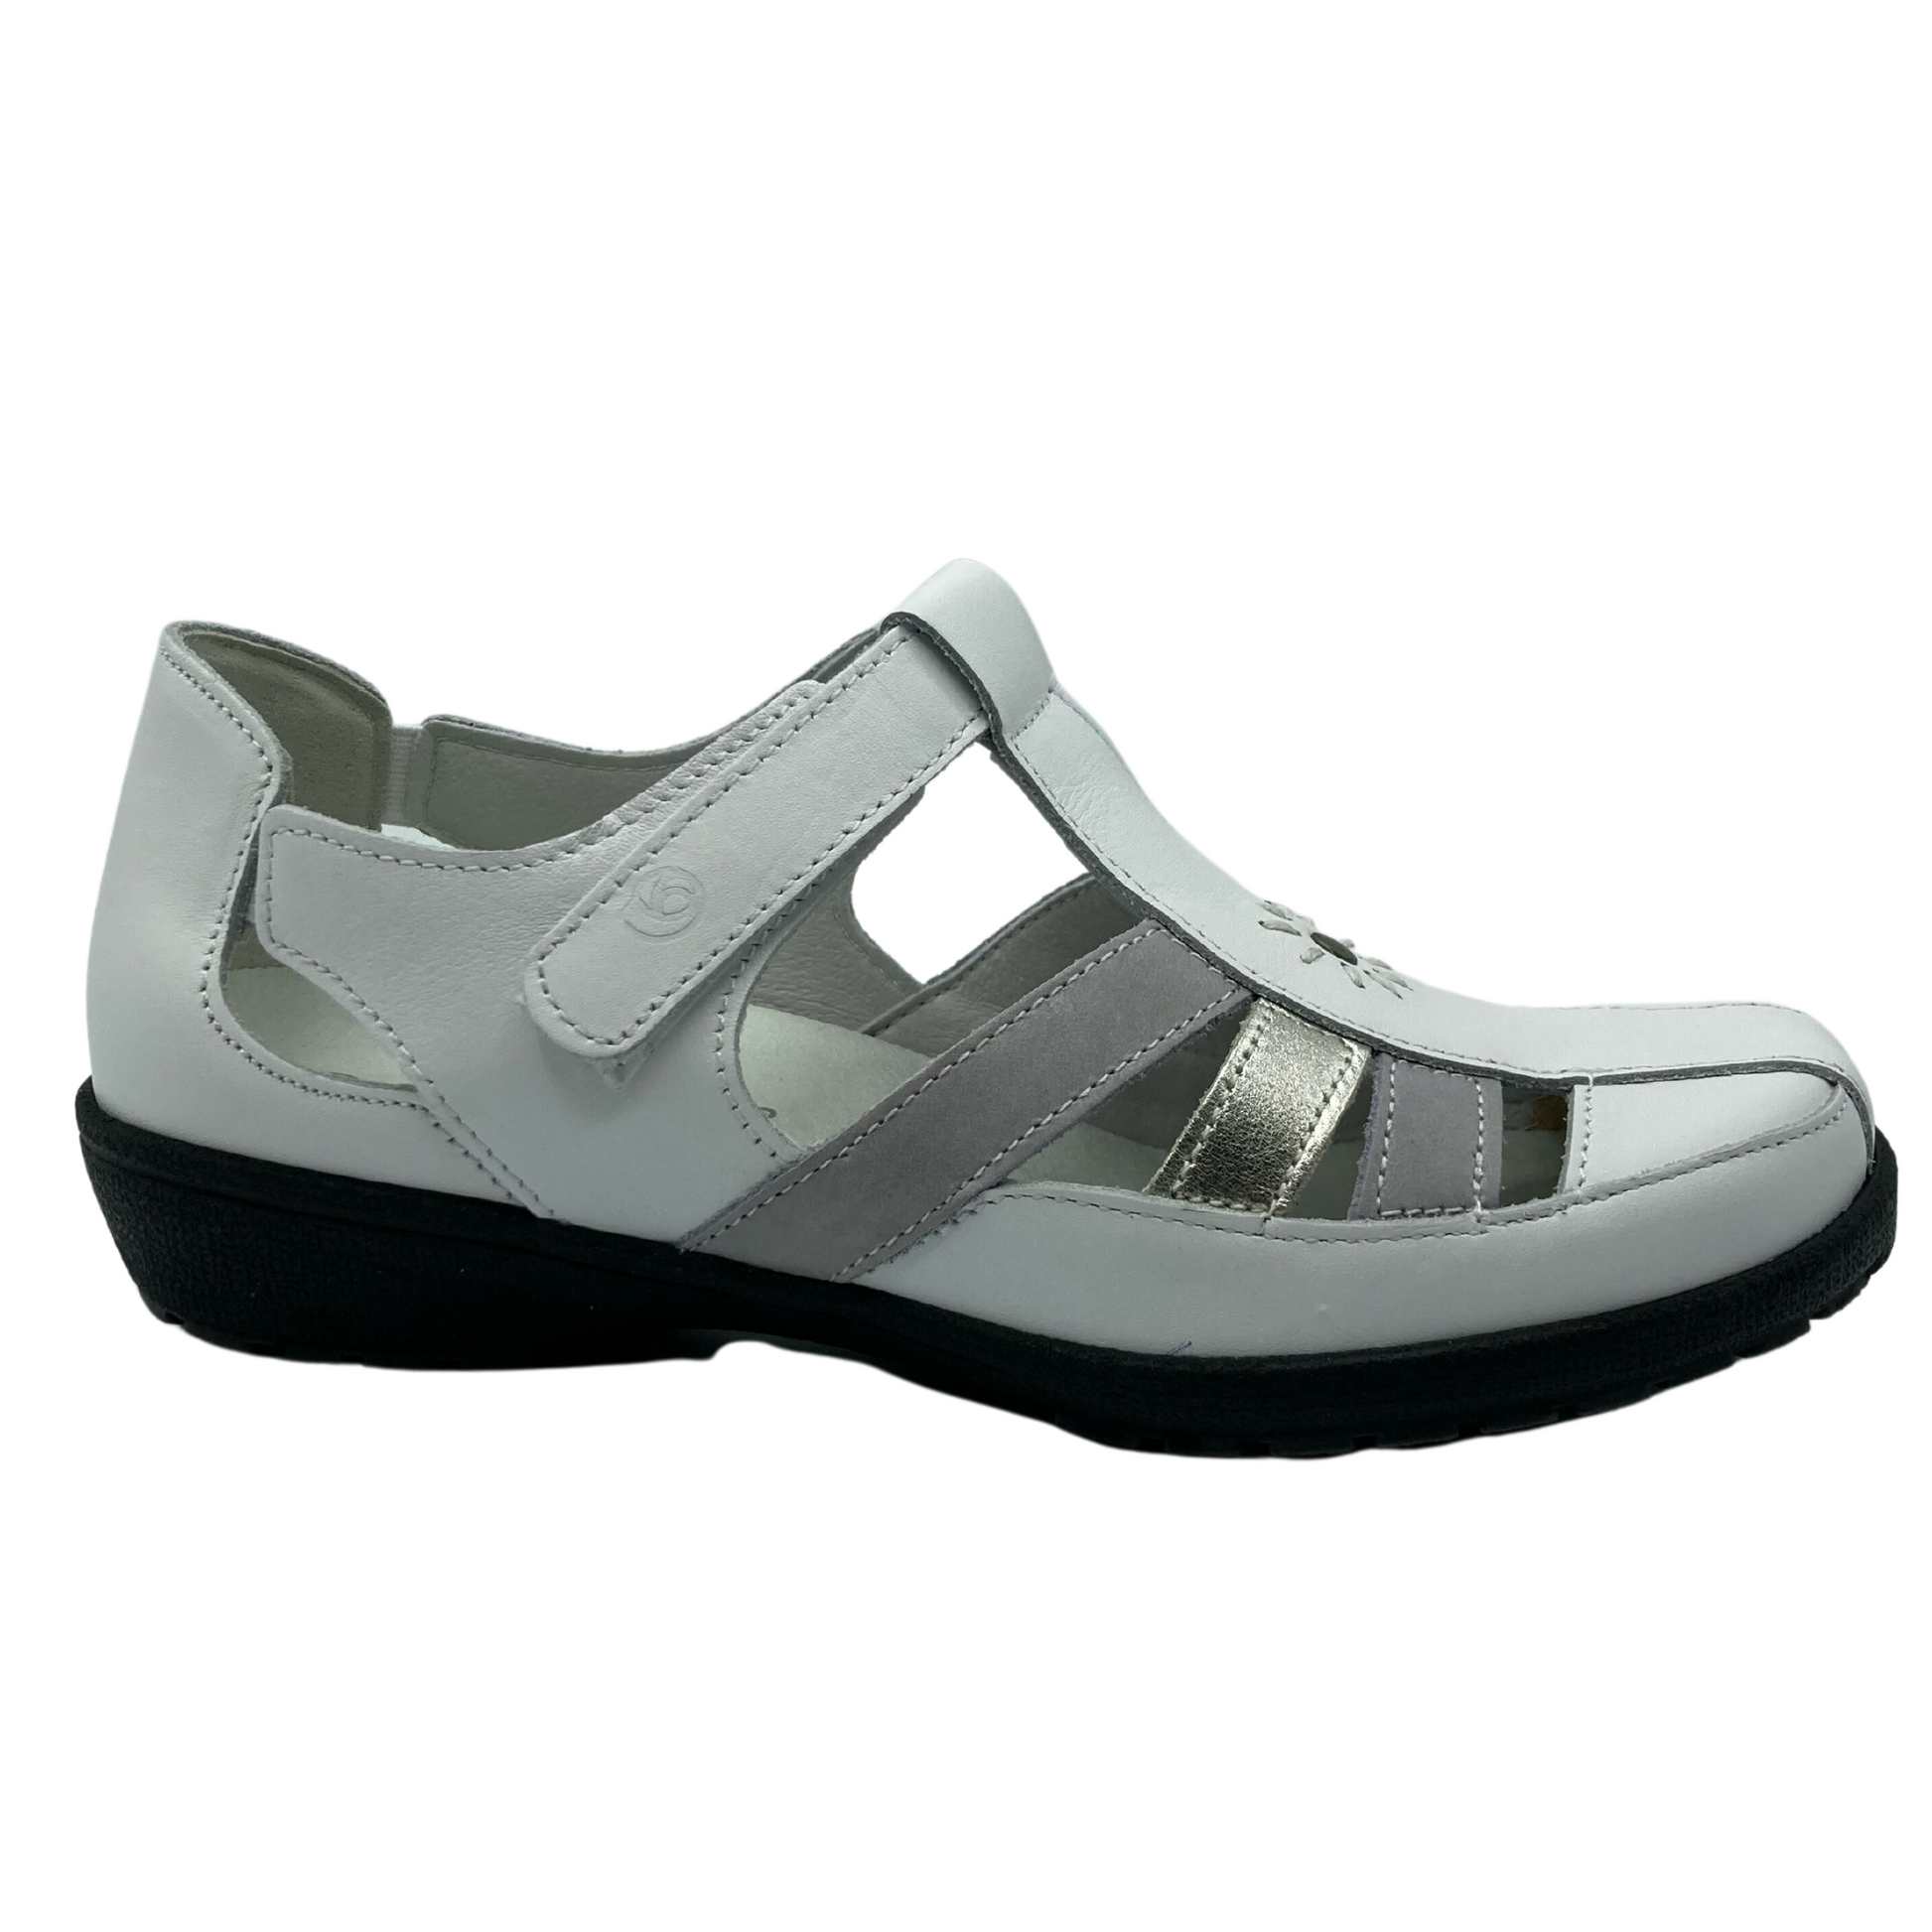 Right facing angle of white leather sandal shoe. White velcro strap and black rubber sole.